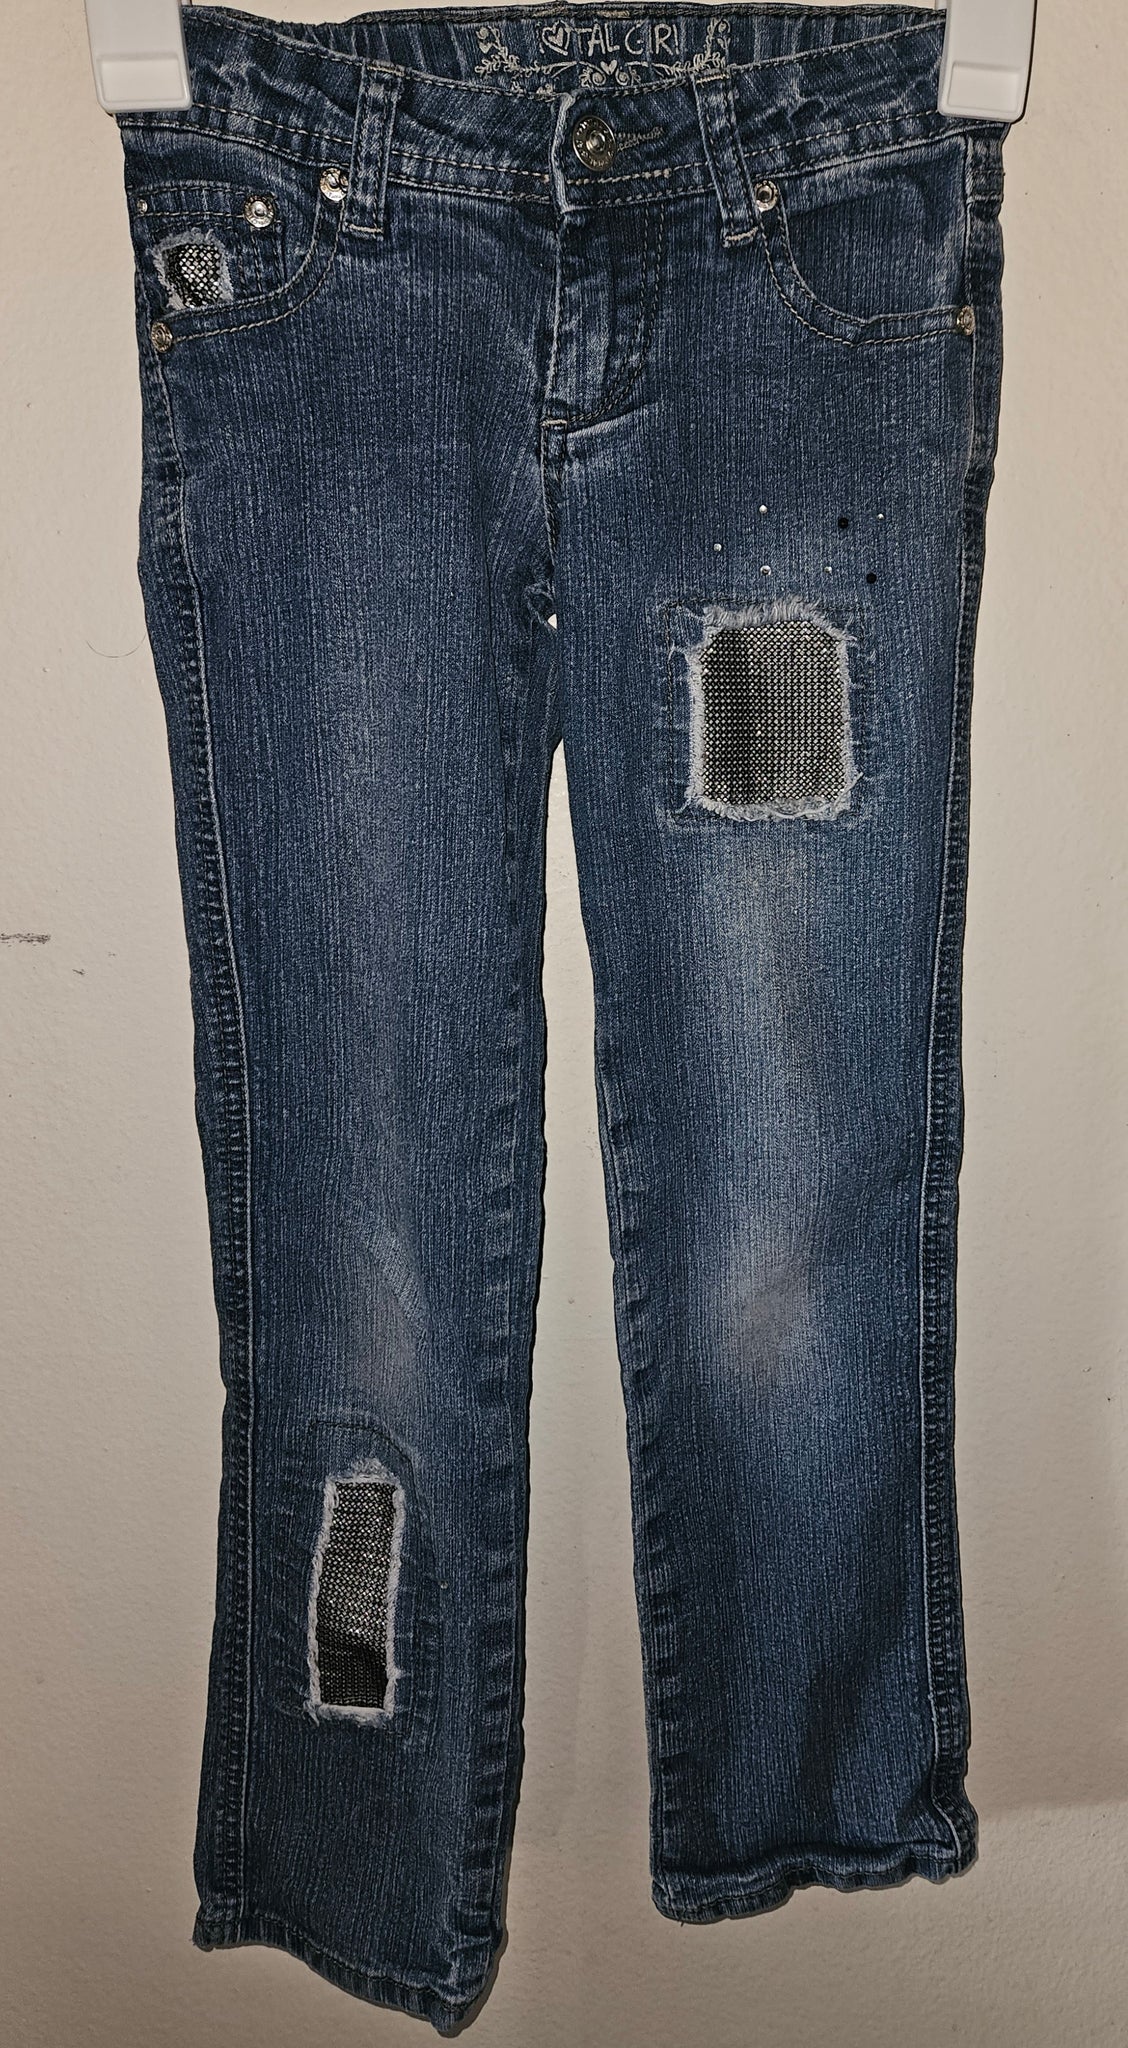 Size 7 Slim I LOVE TAL GIRL Sequence Patch Jeans